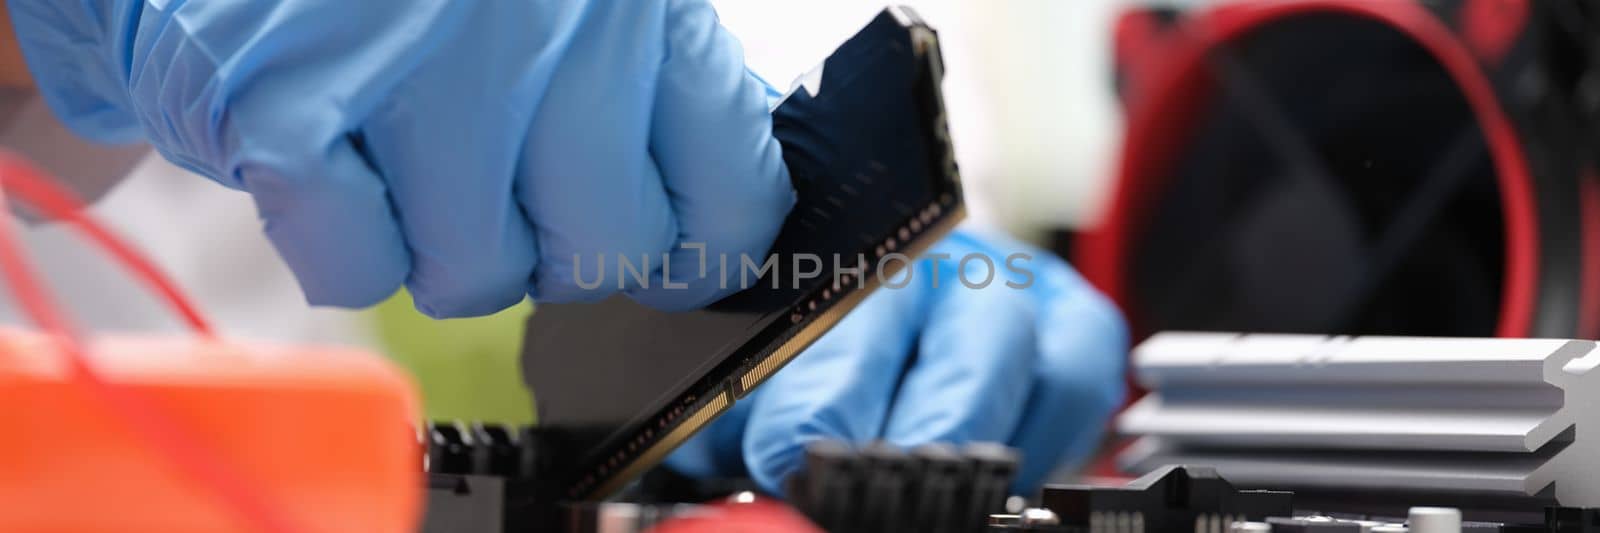 Repair engineer holds RAM chip with hands and inserts RAM of computer into socket of computer motherboard by kuprevich